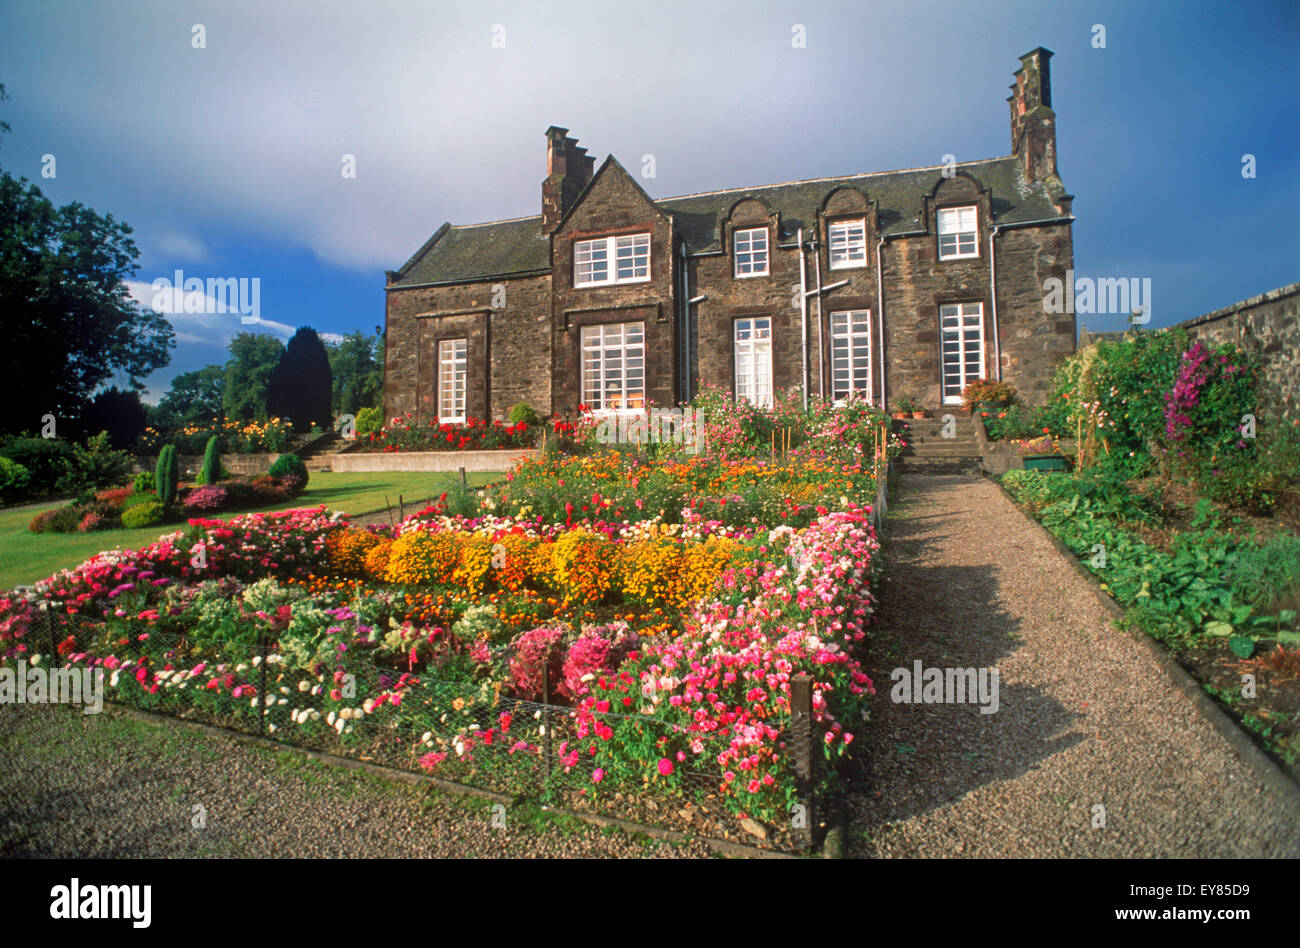 Estate house made of rocks at the Glendronach spirit distillery with garden flowers, stone walls and walkways in Scotland Stock Photo